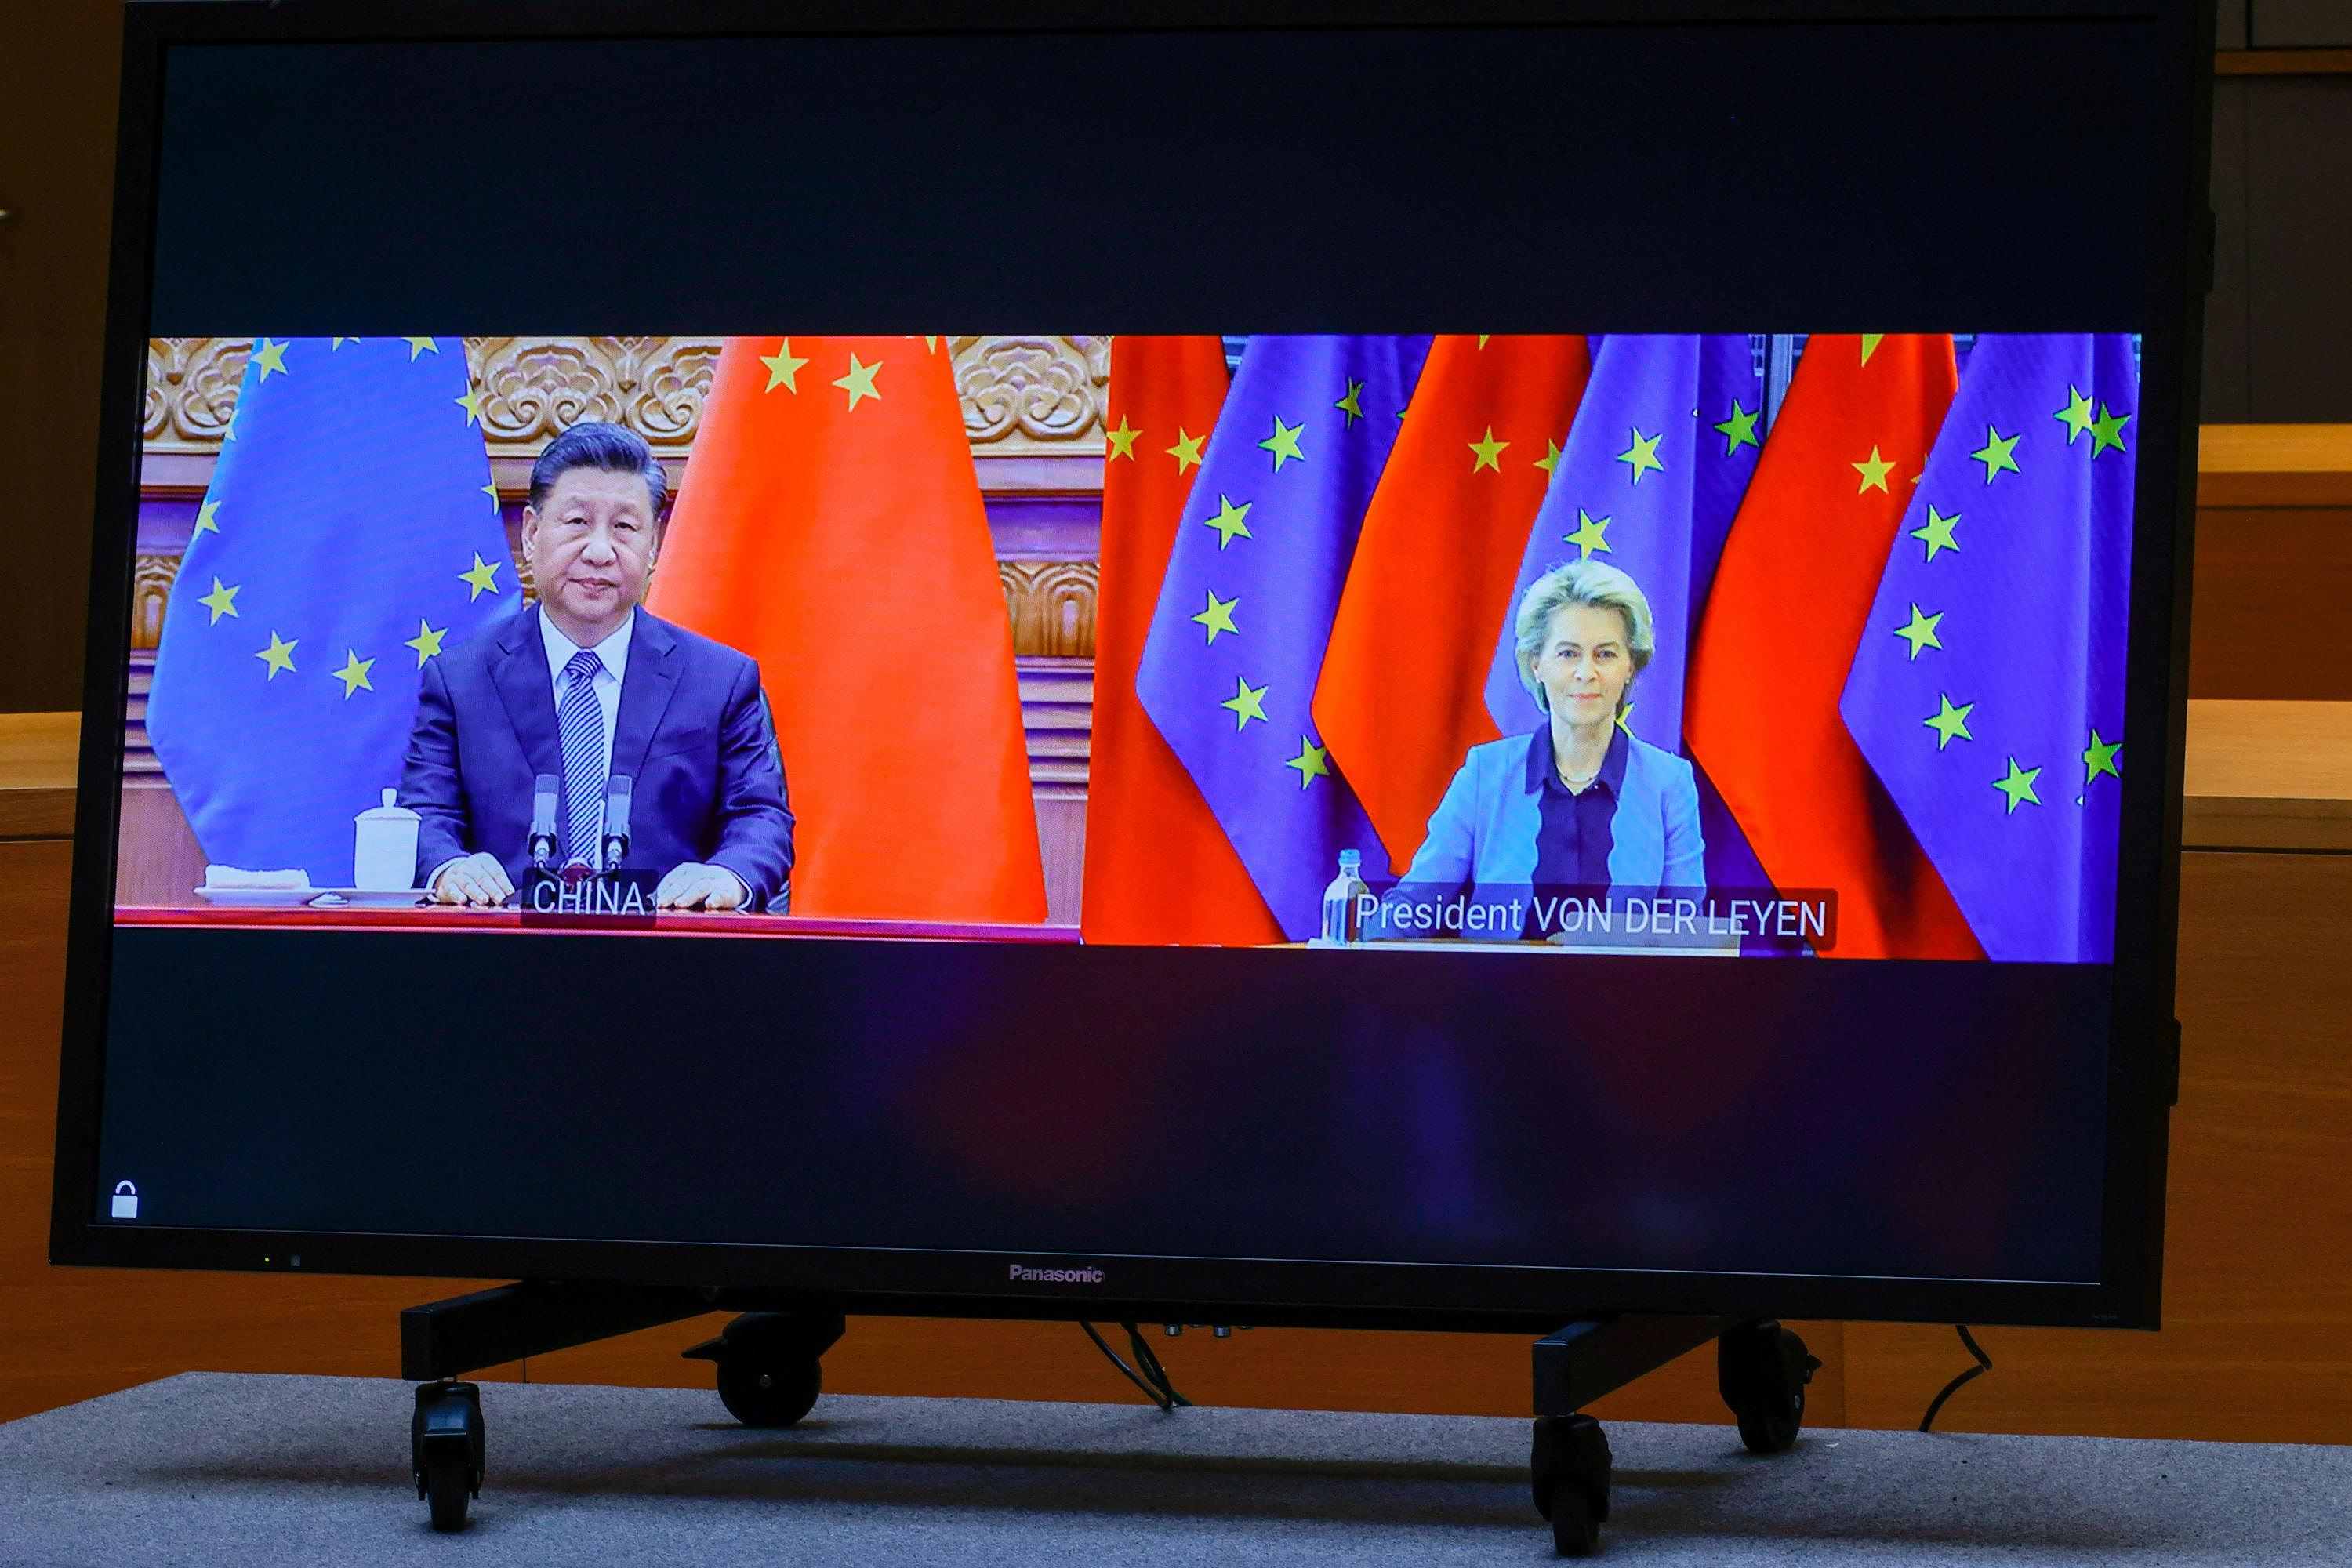 The European Union wants to address “imbalances and differences” with China, according to von der Leyen